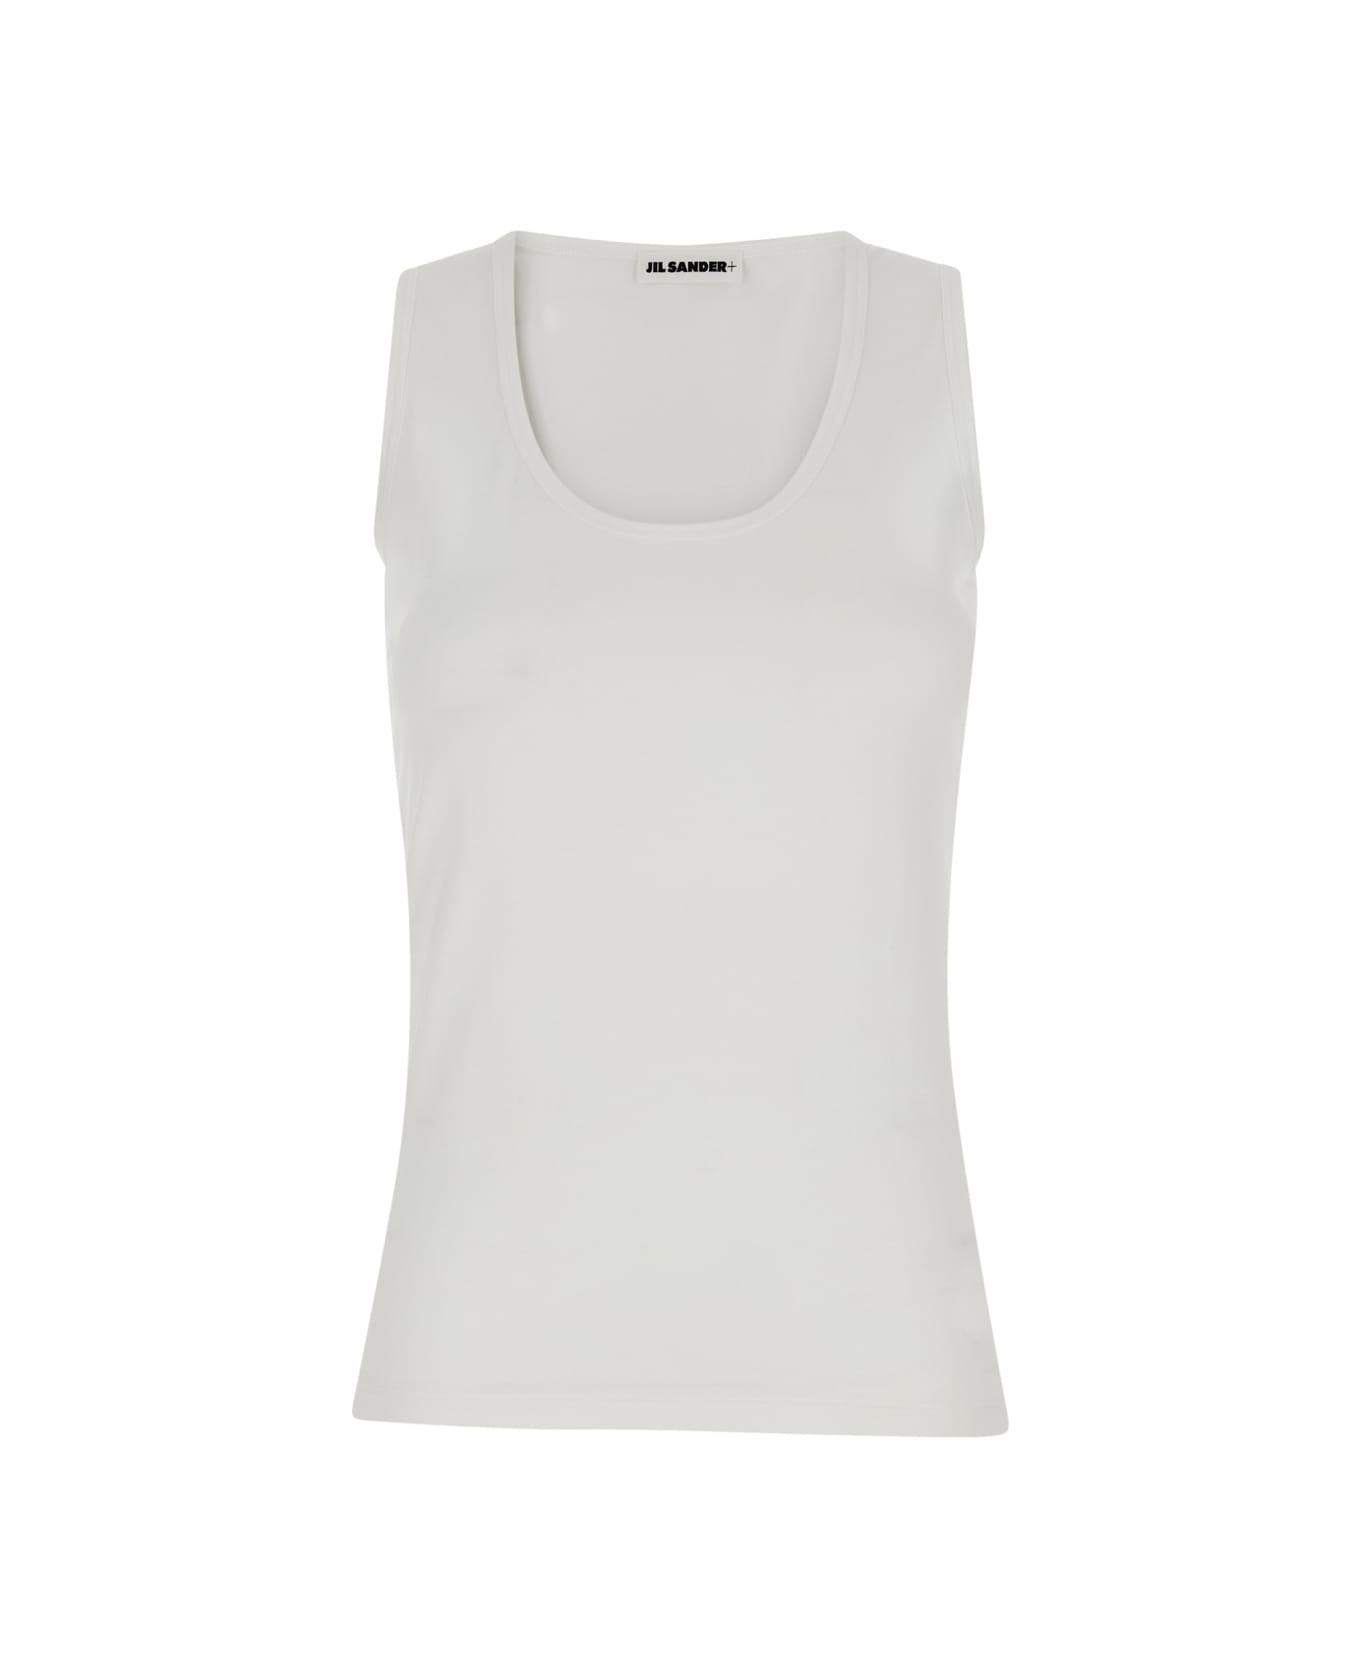 Jil Sander White Basic Tank Top With Embroidered Logo In Cotton Woman - White タンクトップ